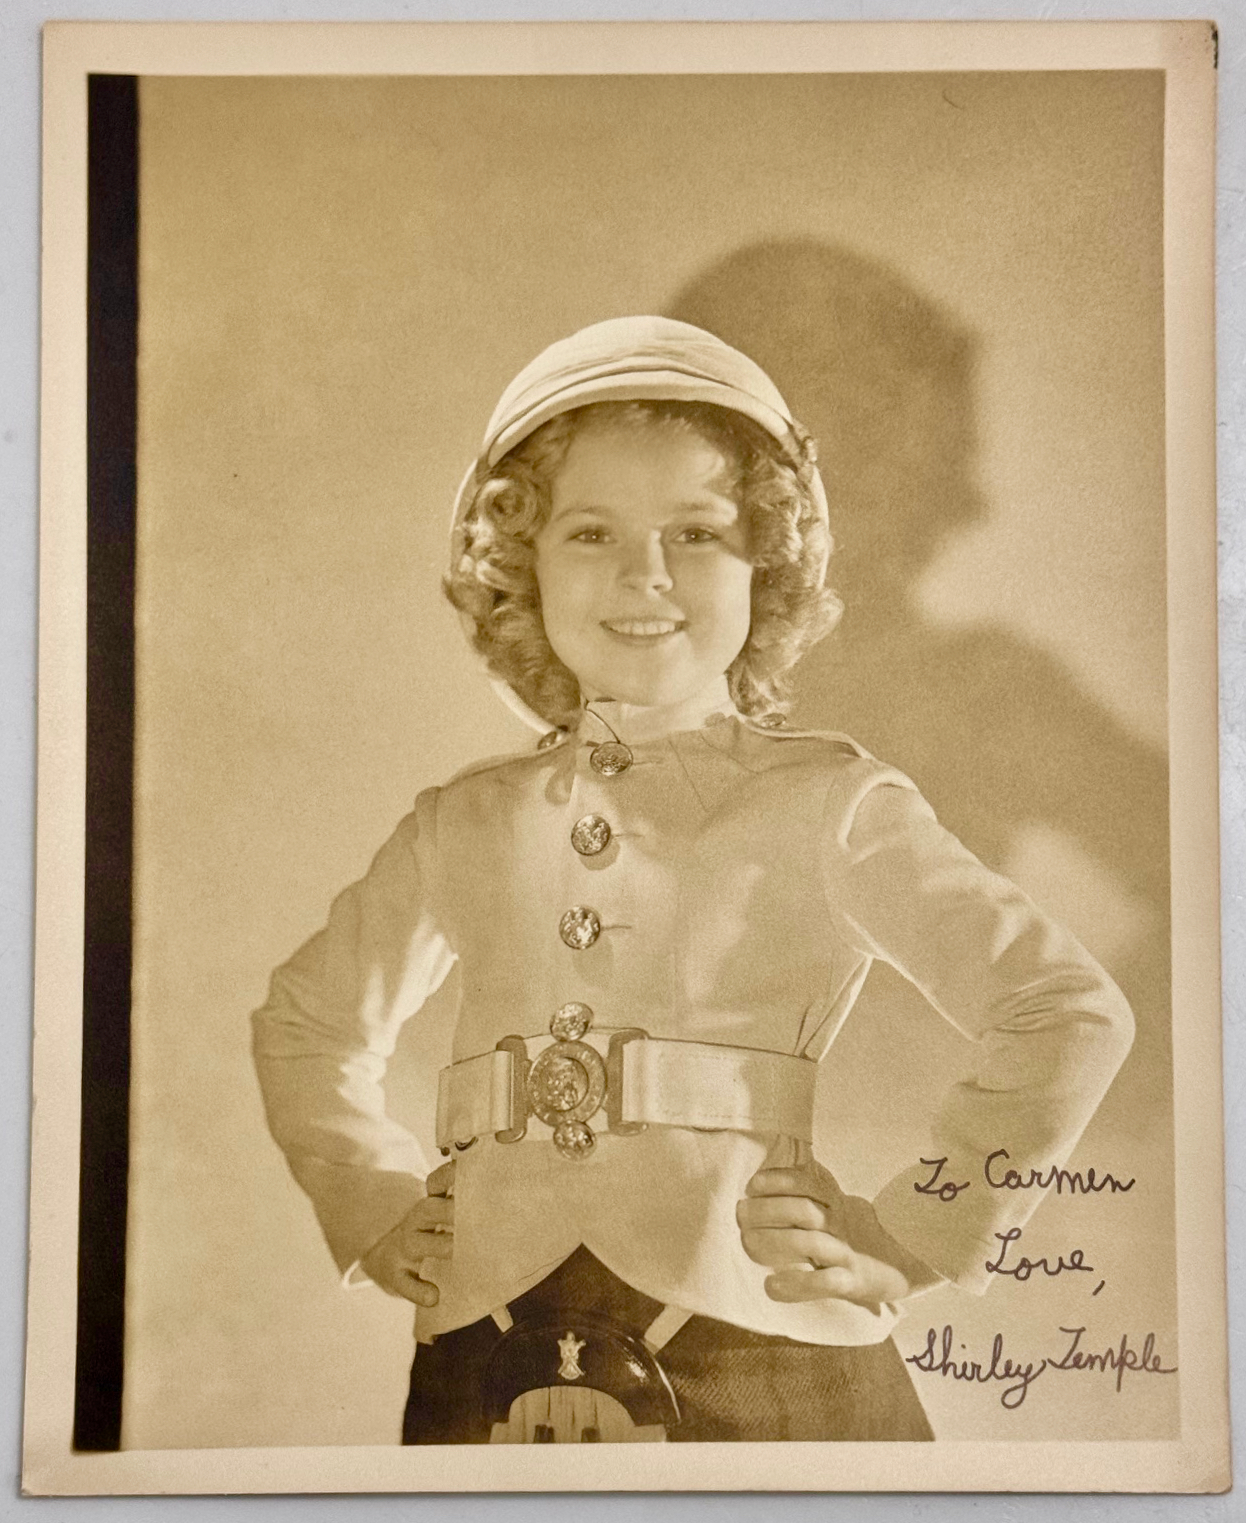 Shirley TEmple, Inscribed Silver Gelatin Print, 1937